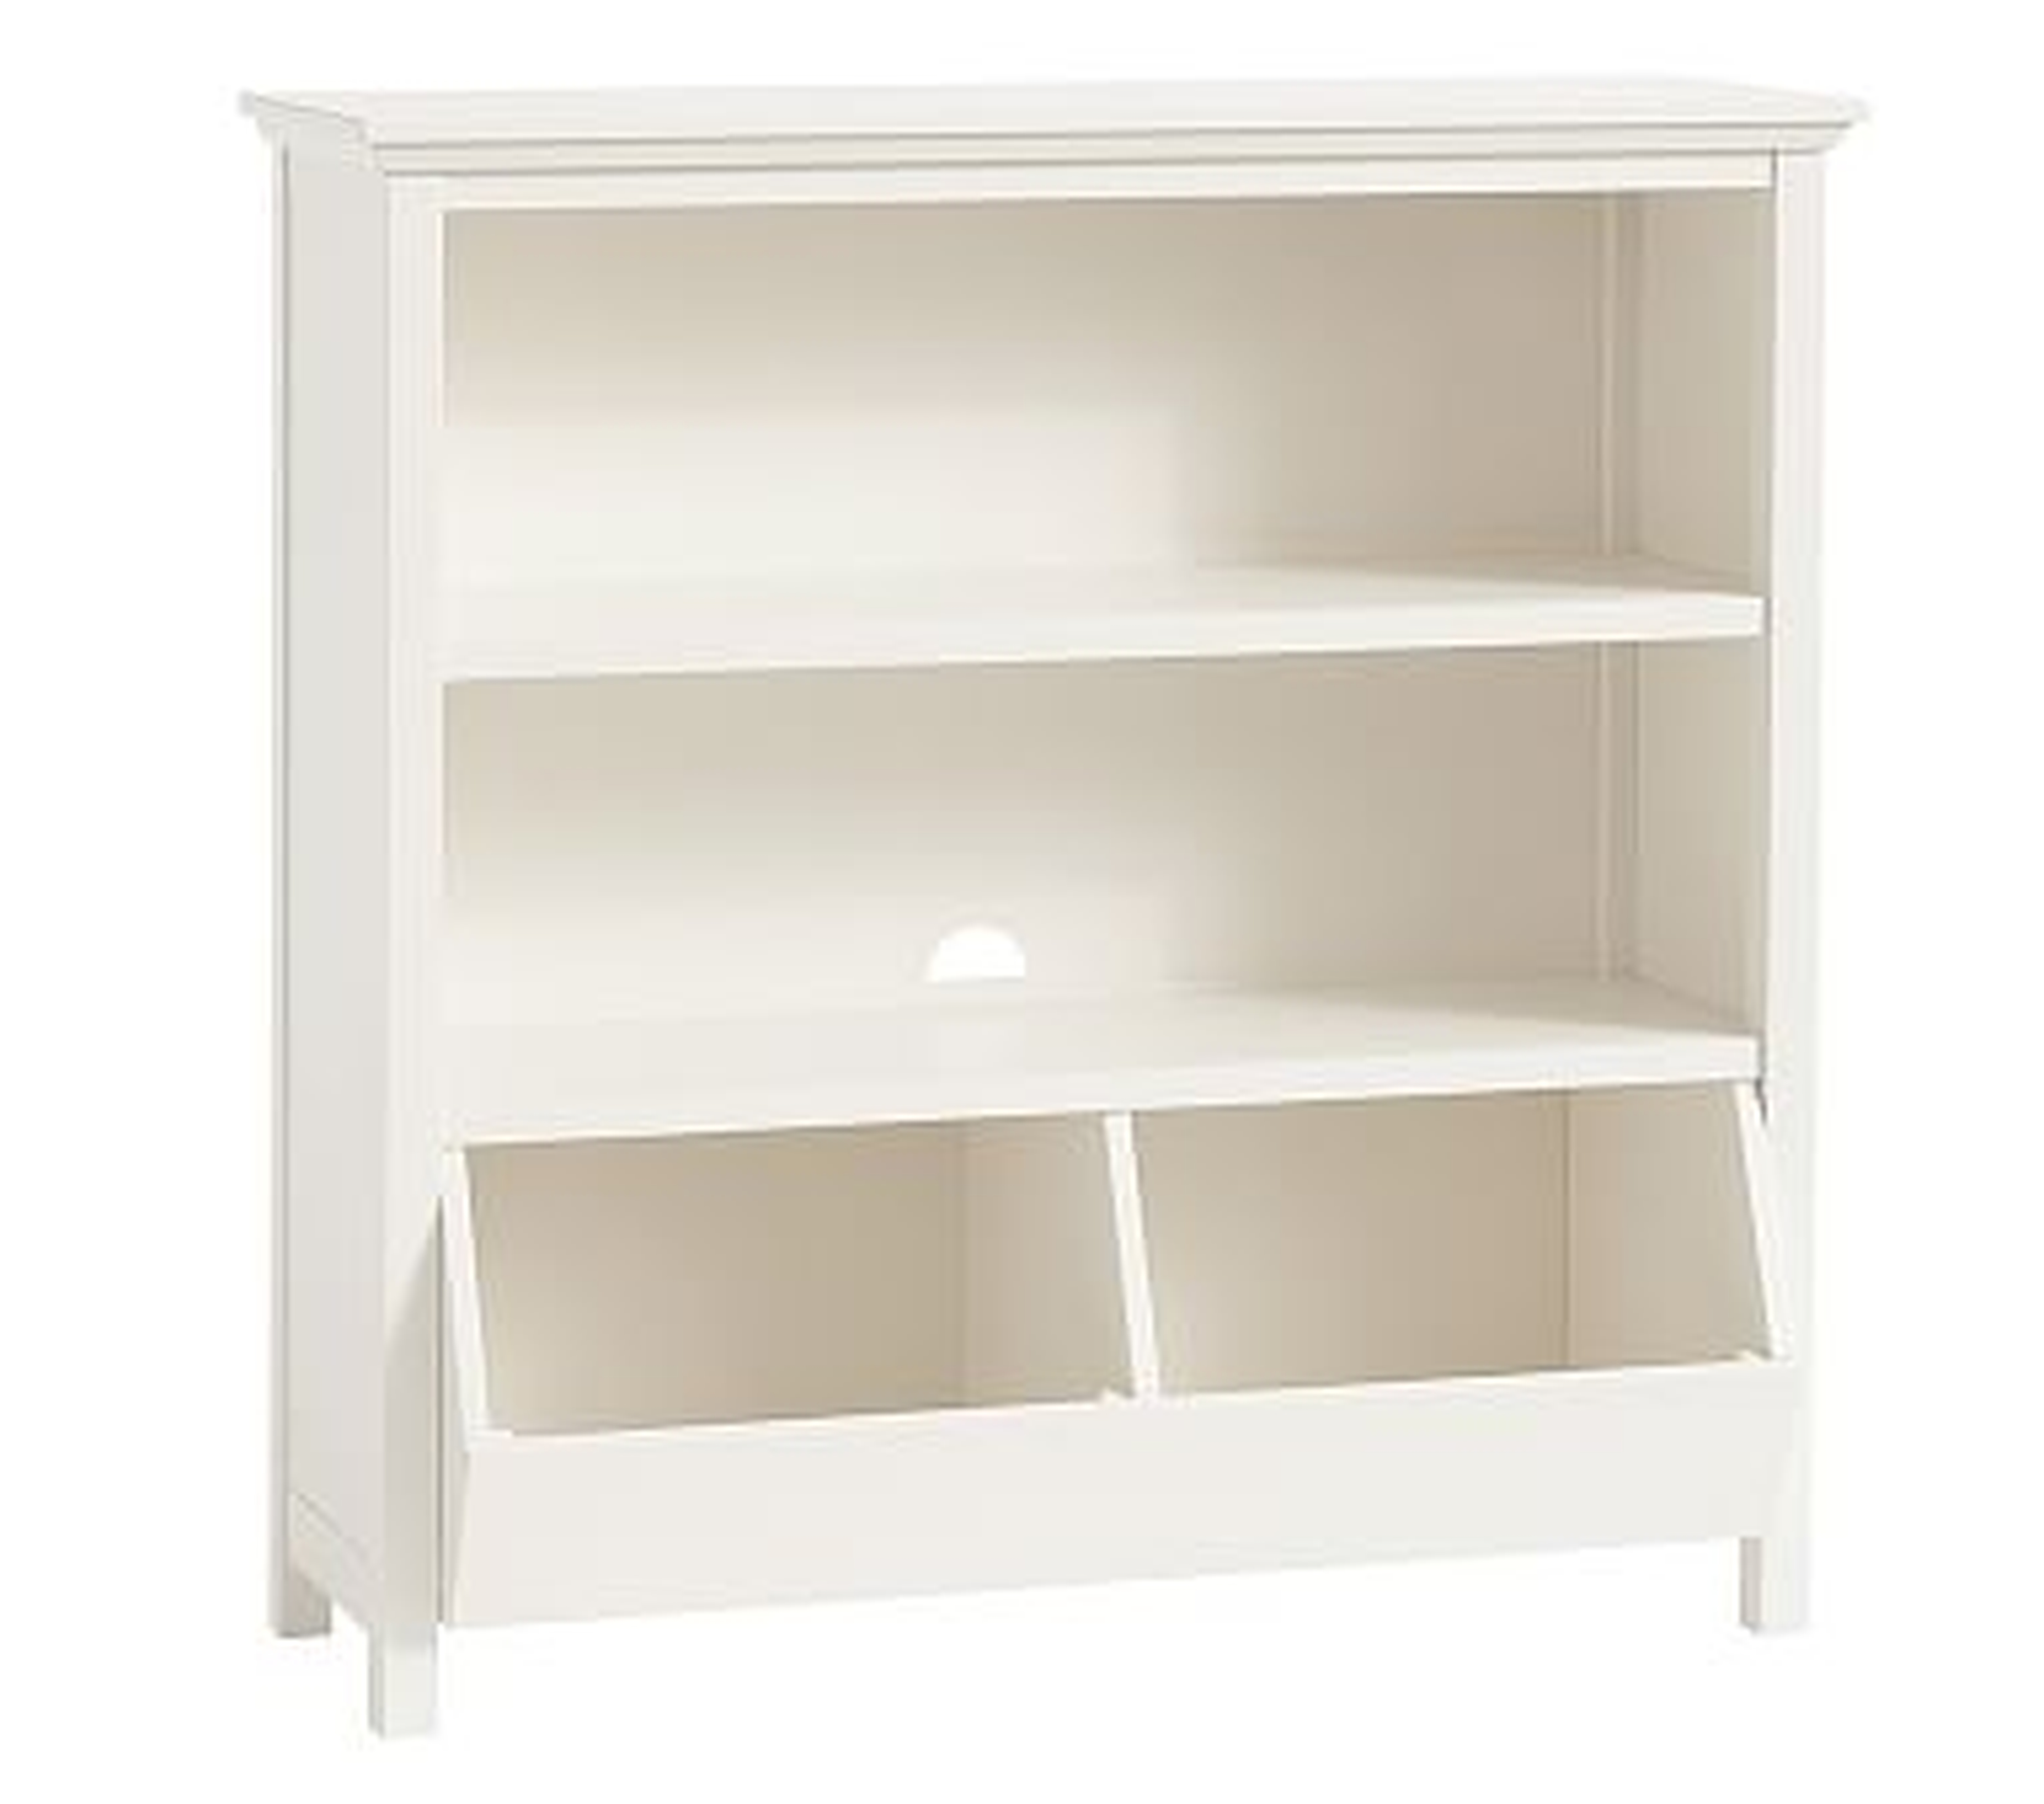 Cameron Storage Bookcase, Simply White, Standard UPS Delivery - Pottery Barn Kids